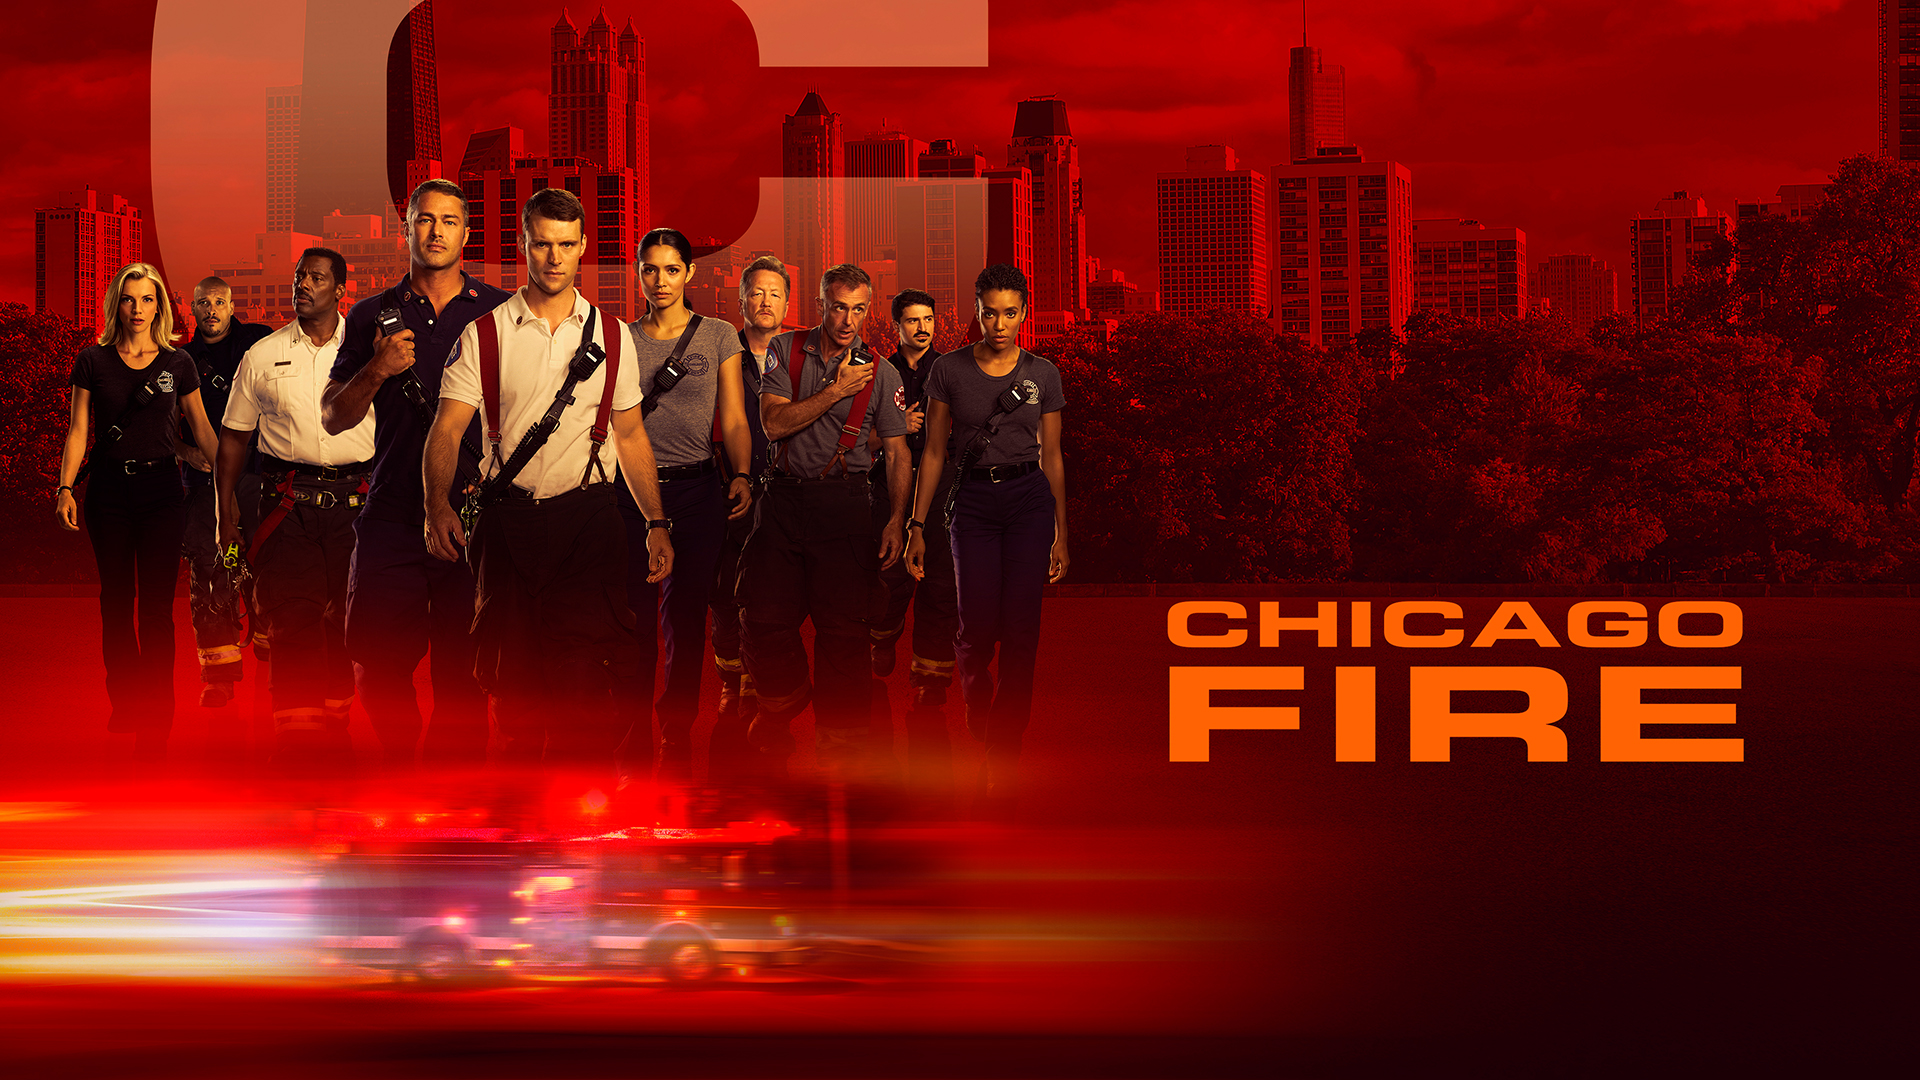 chicago fire nbc episode cast did backgrounds spoilertv enough med thetvdb artwork shut down wasn